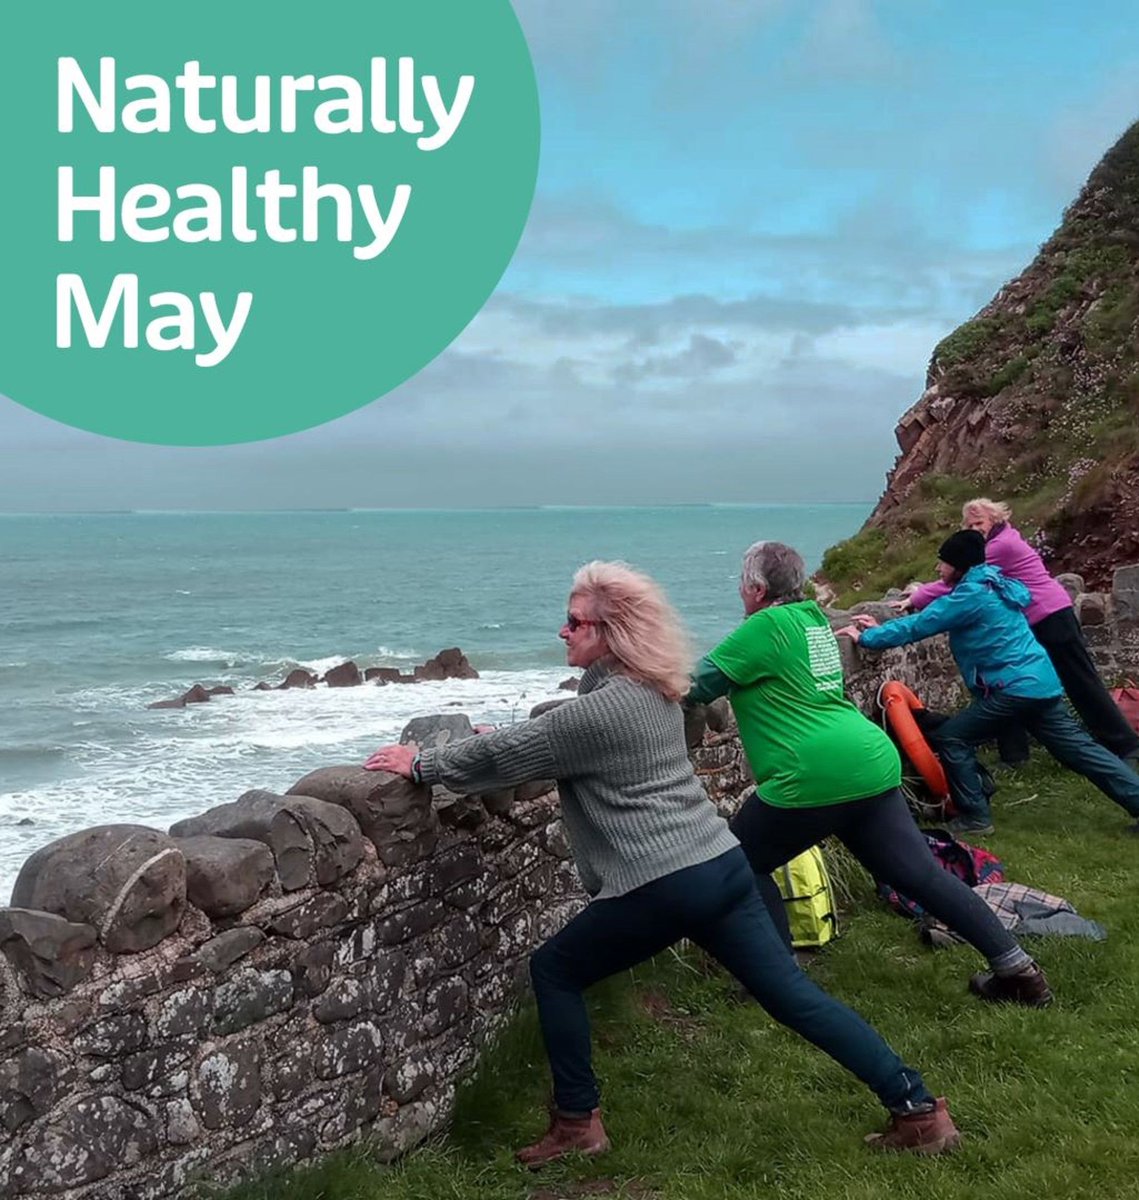 🌳#NaturallyHealthyMay is the perfect time to get outside with family and friends and explore Devon’s beautiful green and blue spaces. Being more active can be great for your physical health. Stay tuned to find out more next week 🤗 @ActiveDevon and @DevonLNP